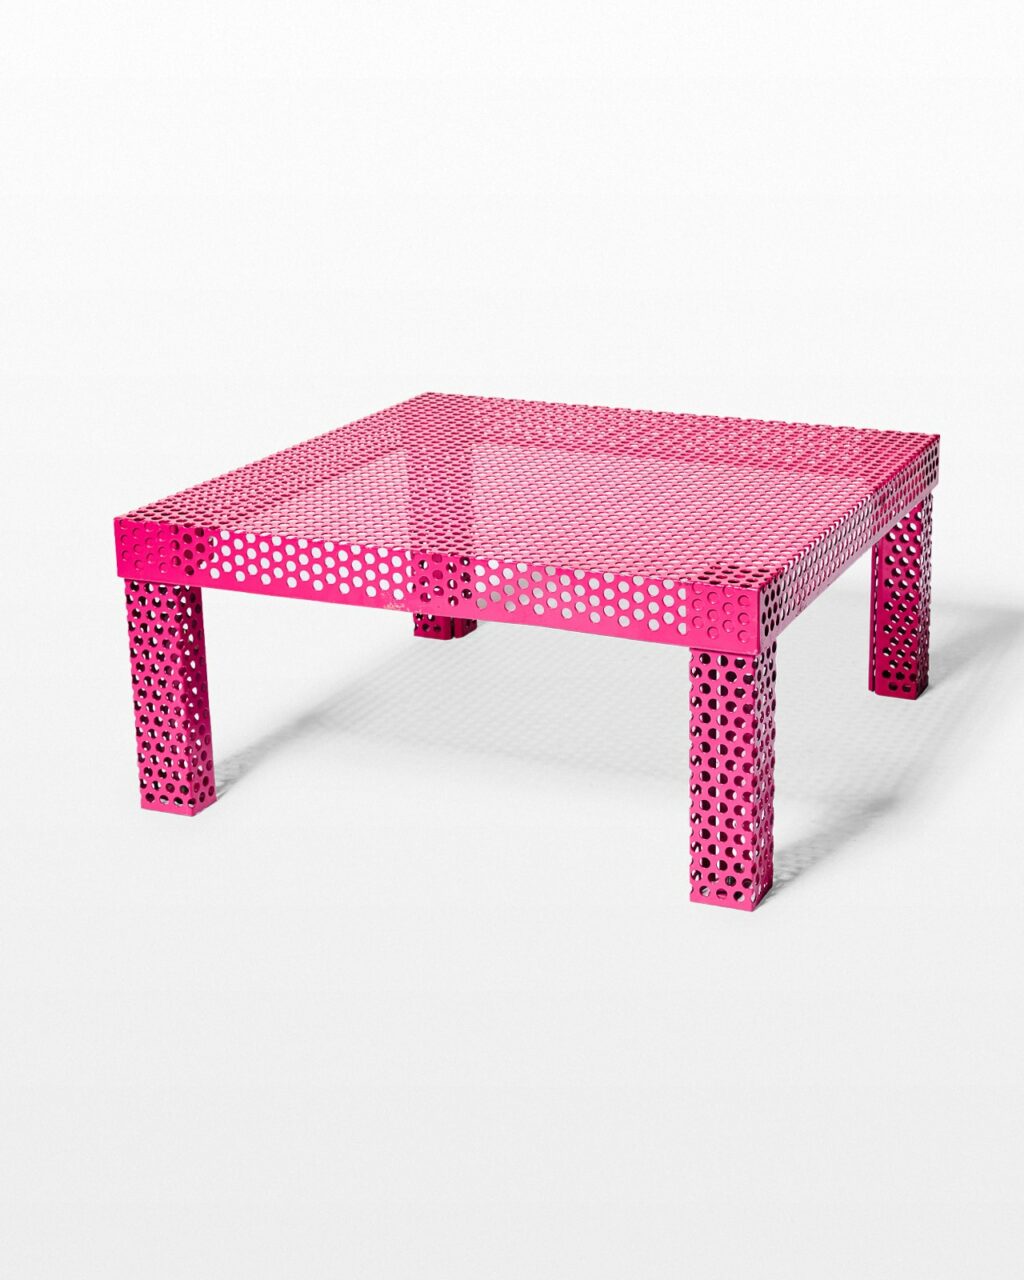 Rogue Side Table